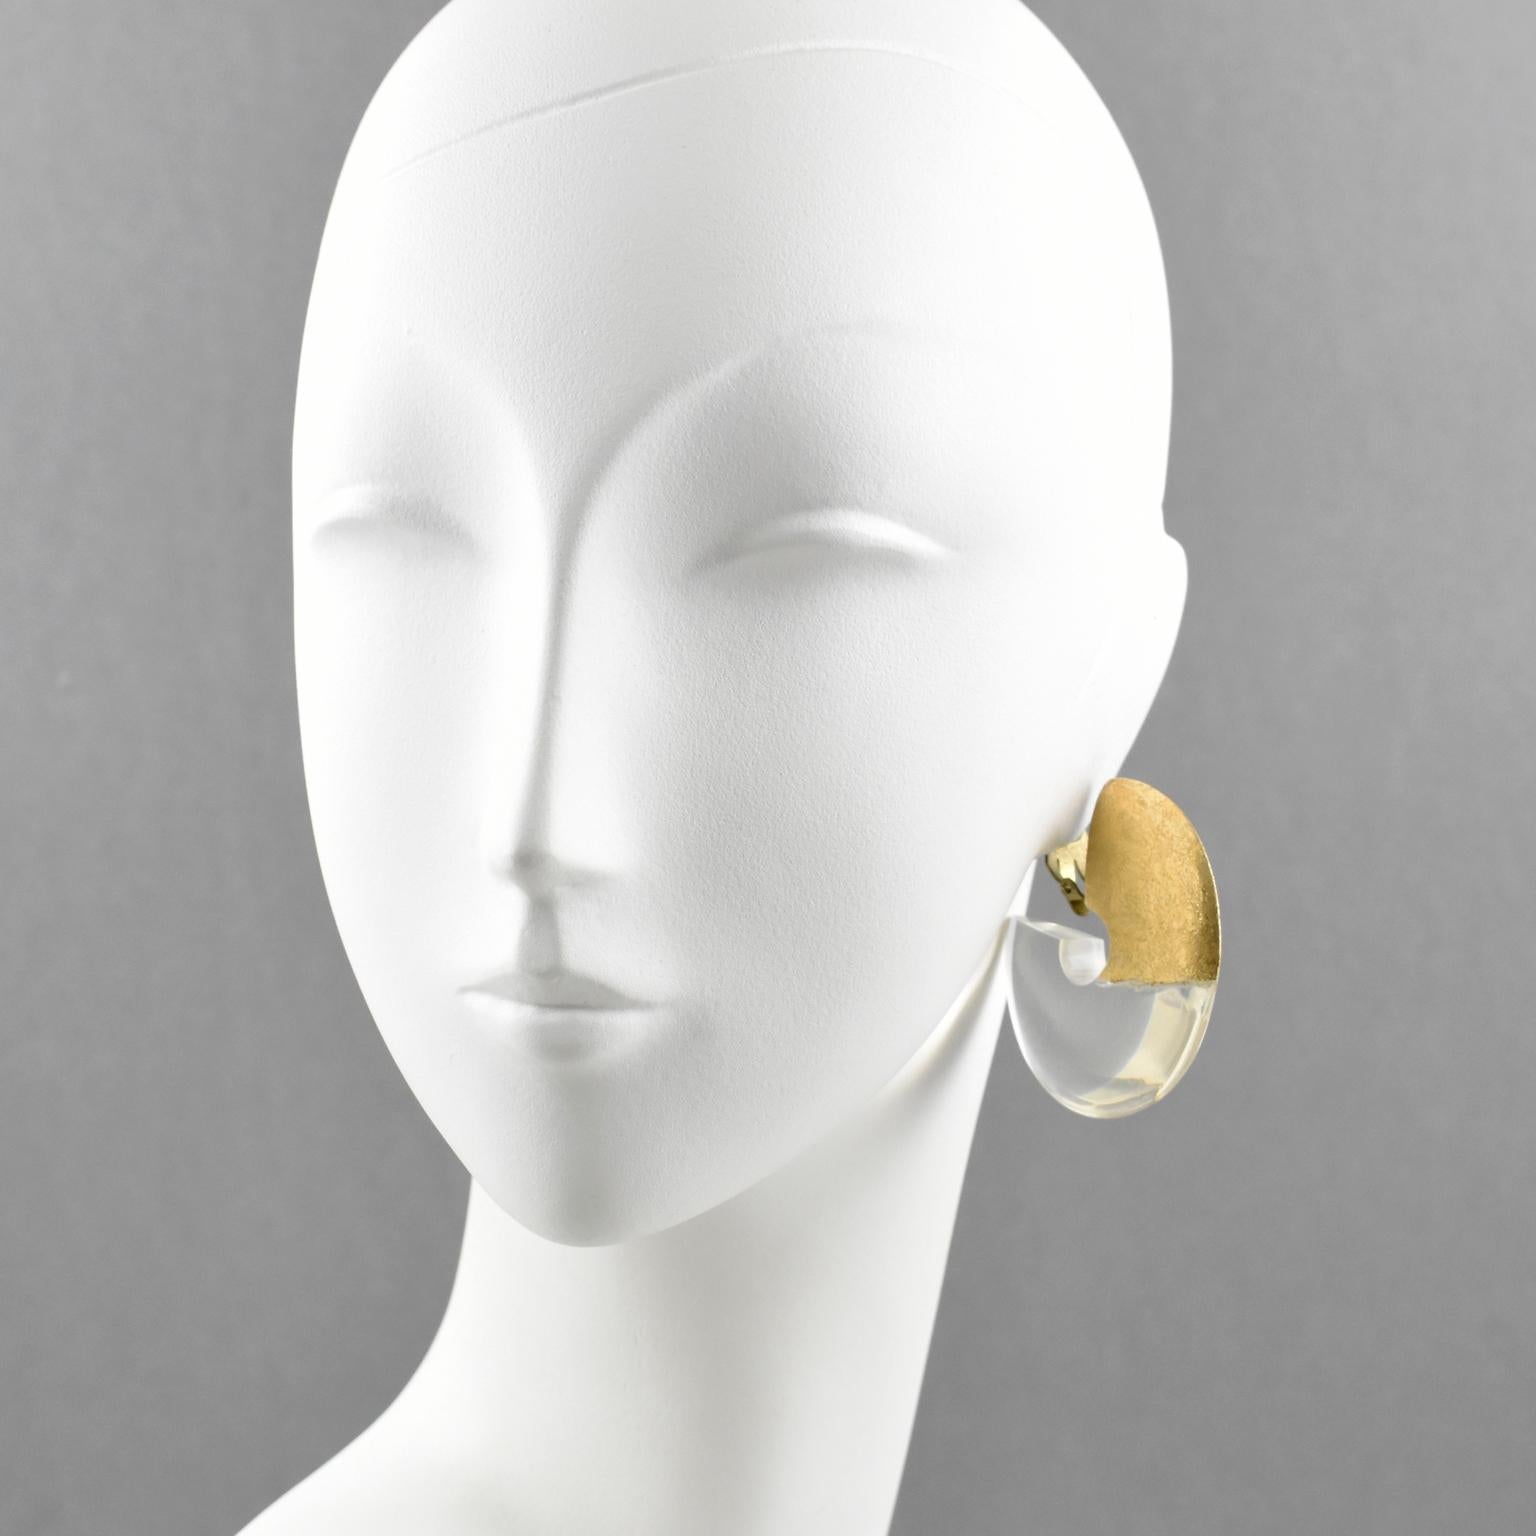 Stylish oversized hoop clip-on earrings by Gerda Lyngaard for Monies. Crystal clear acrylic or Lucite and gold foil application. Marked 'Monies' on the clasp. 
Measurements: 2.07 in. diameter (5.2 cm) x 0.38 in. thick (1 cm)